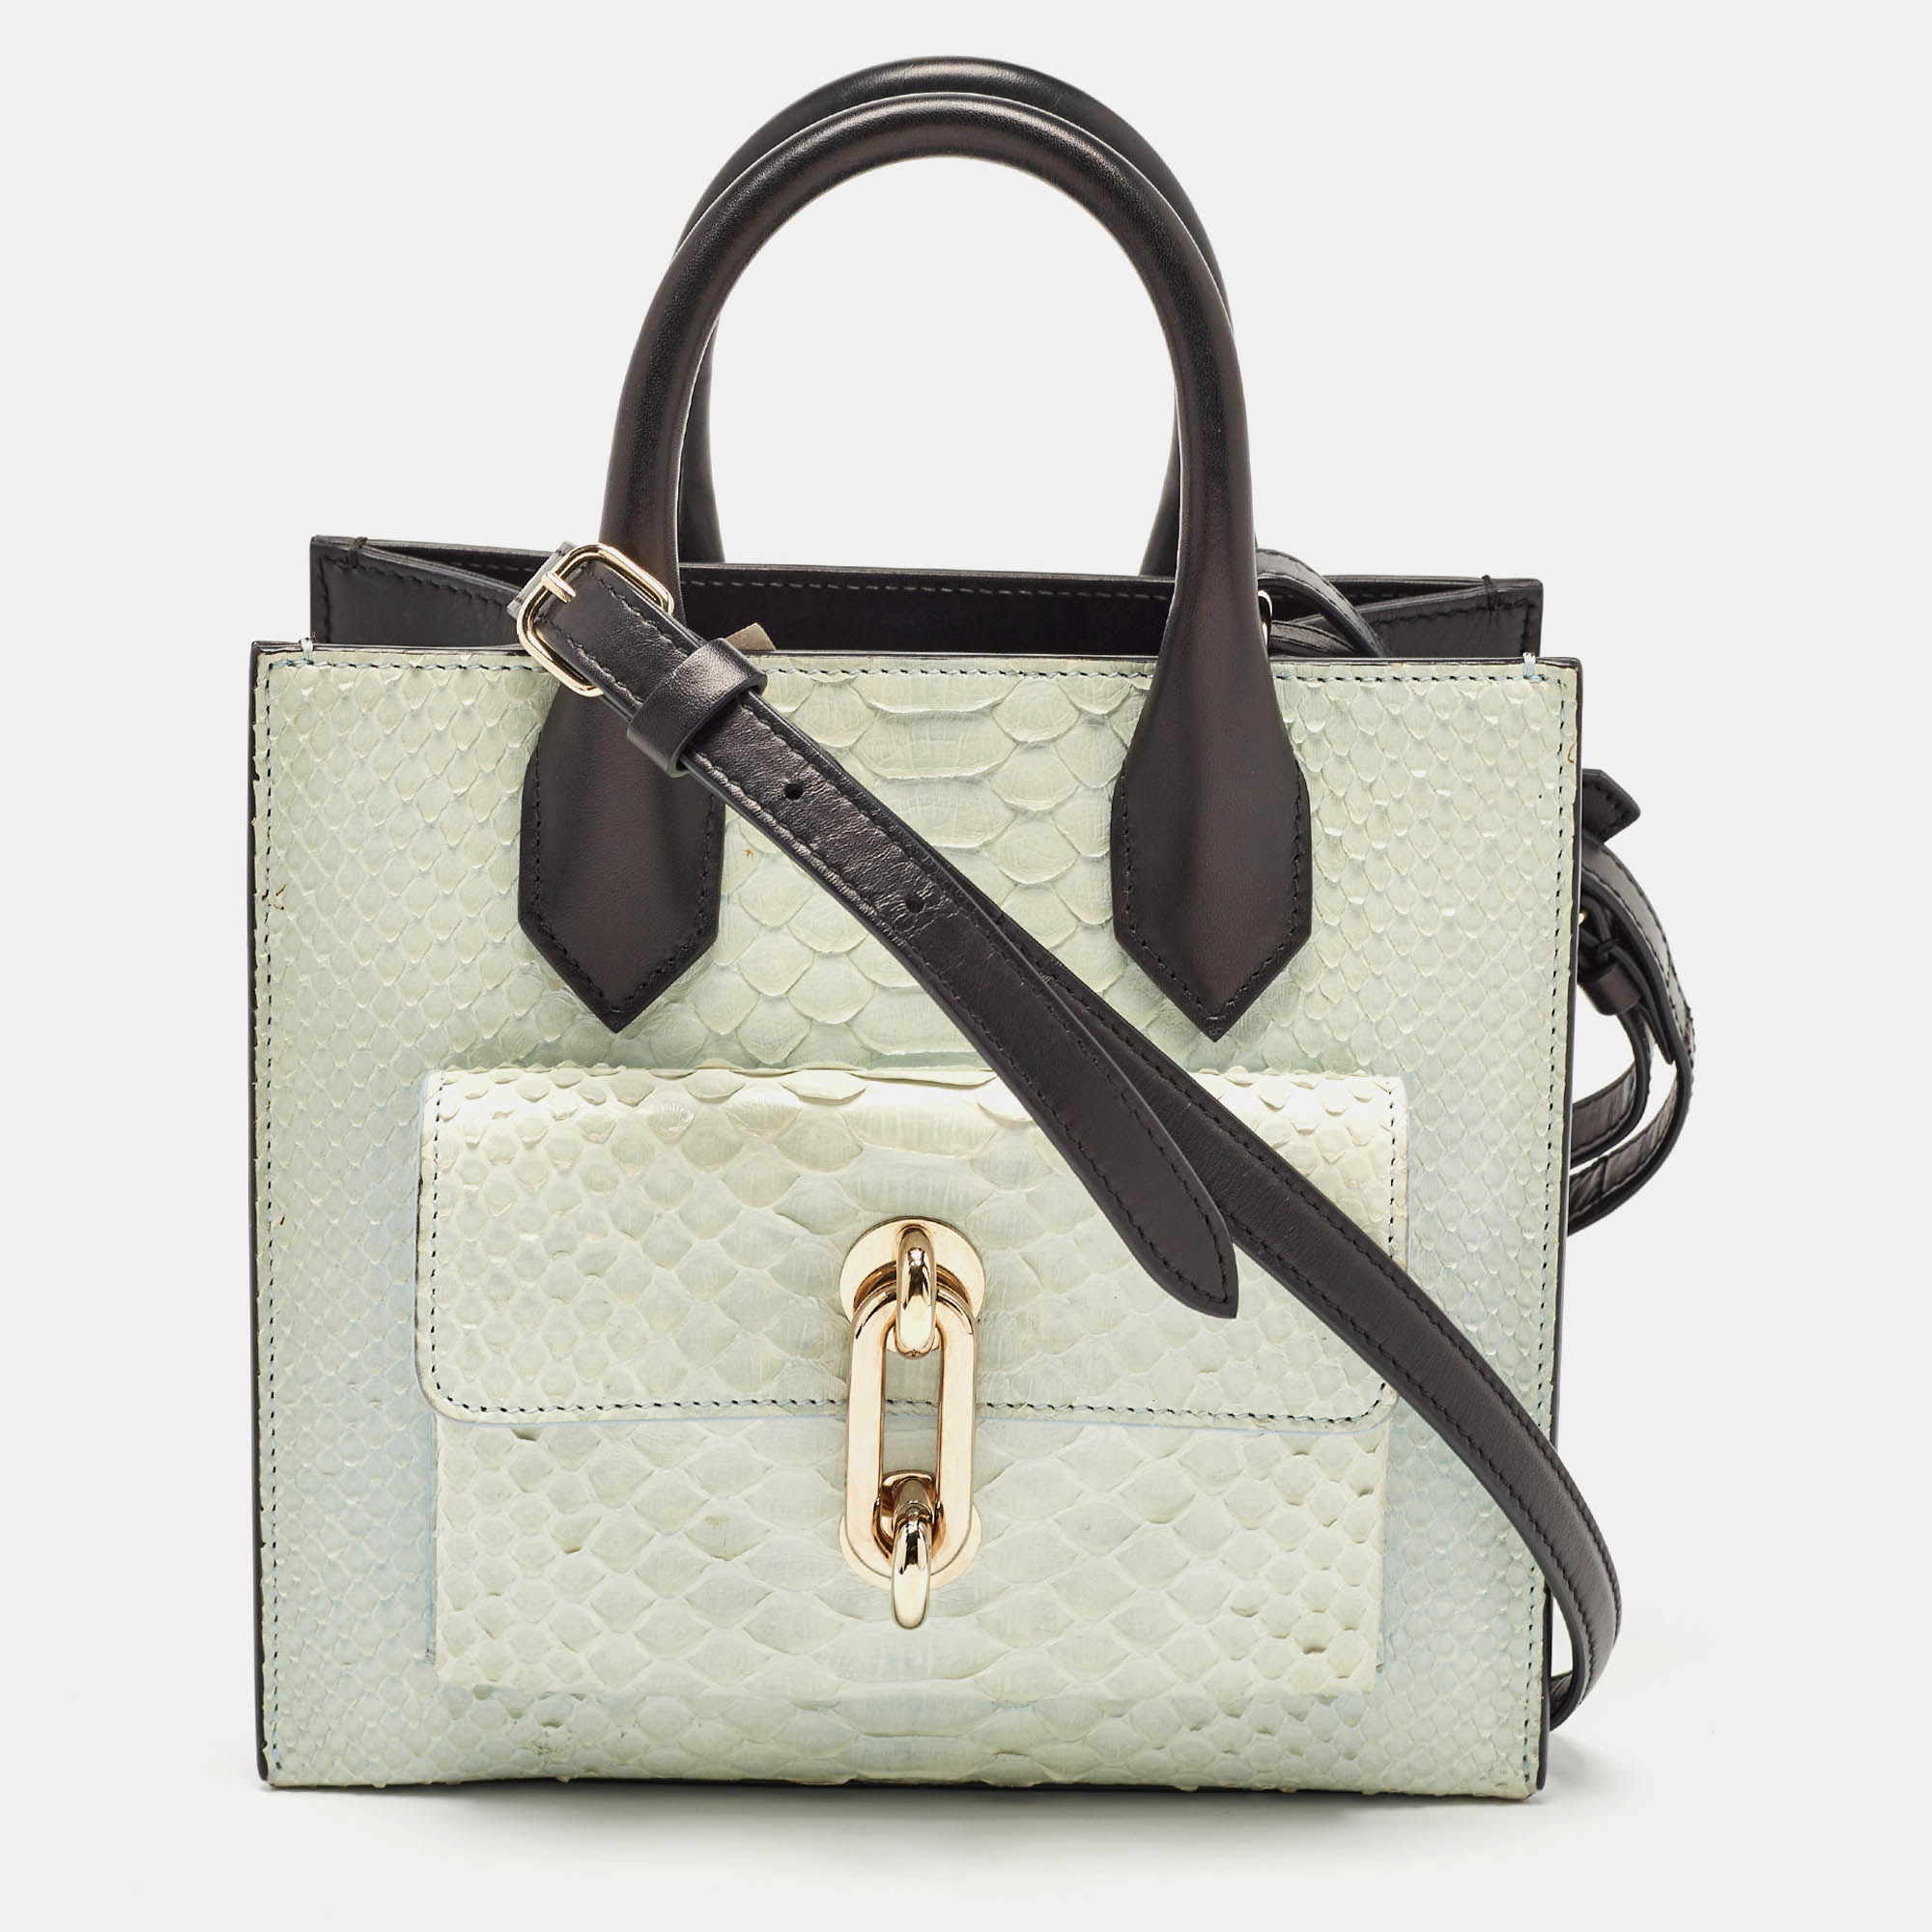 Balenciaga mint green/black python and leather mini maillon all afternoon tote